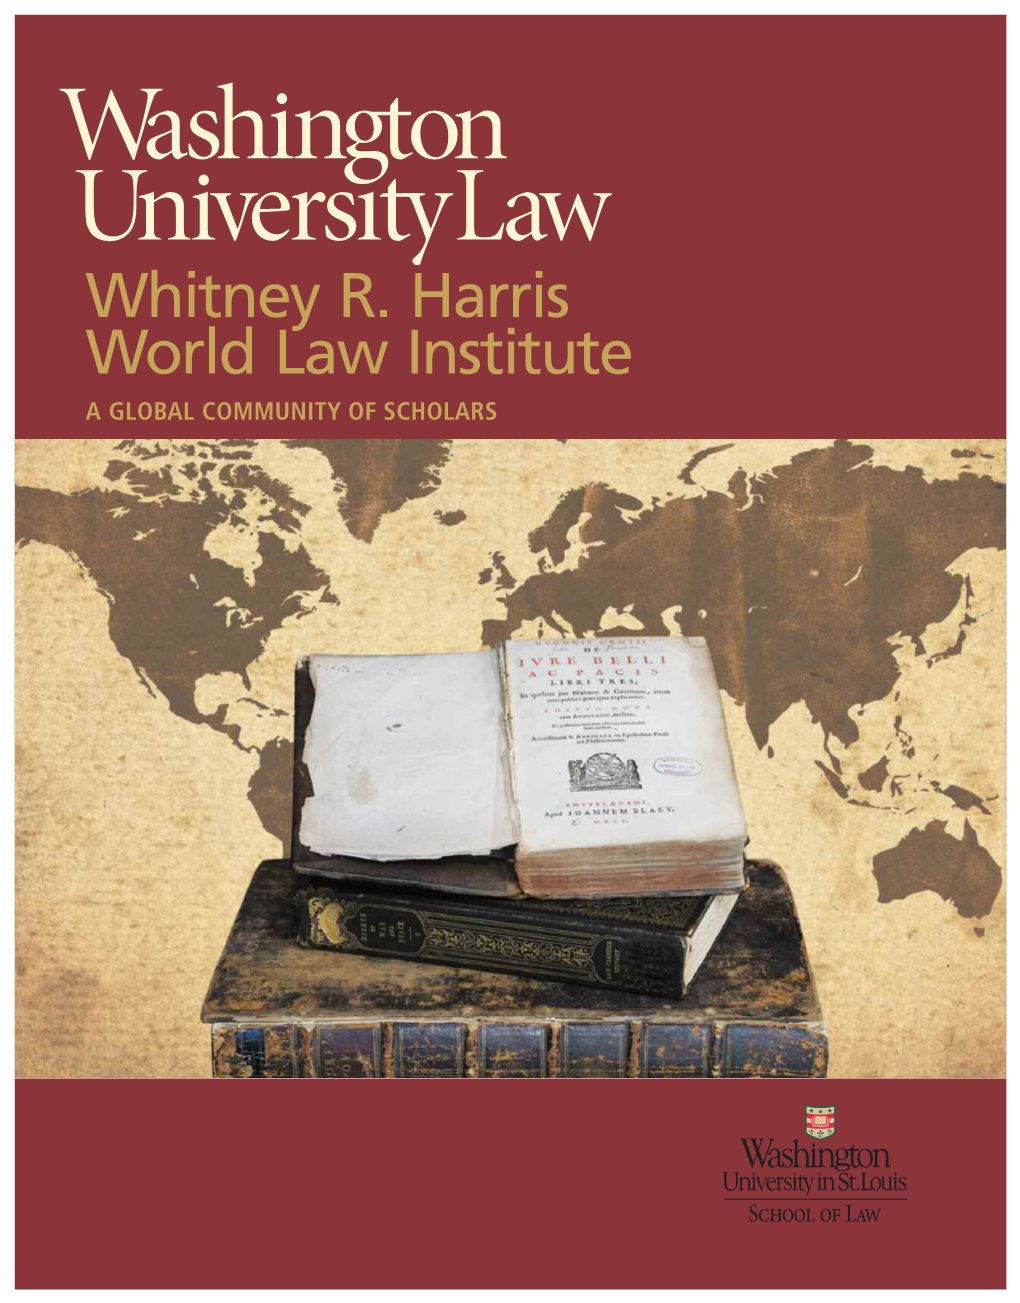 Whitney R. Harris World Law Institute a GLOBAL COMMUNITY of SCHOLARS WHITNEY R